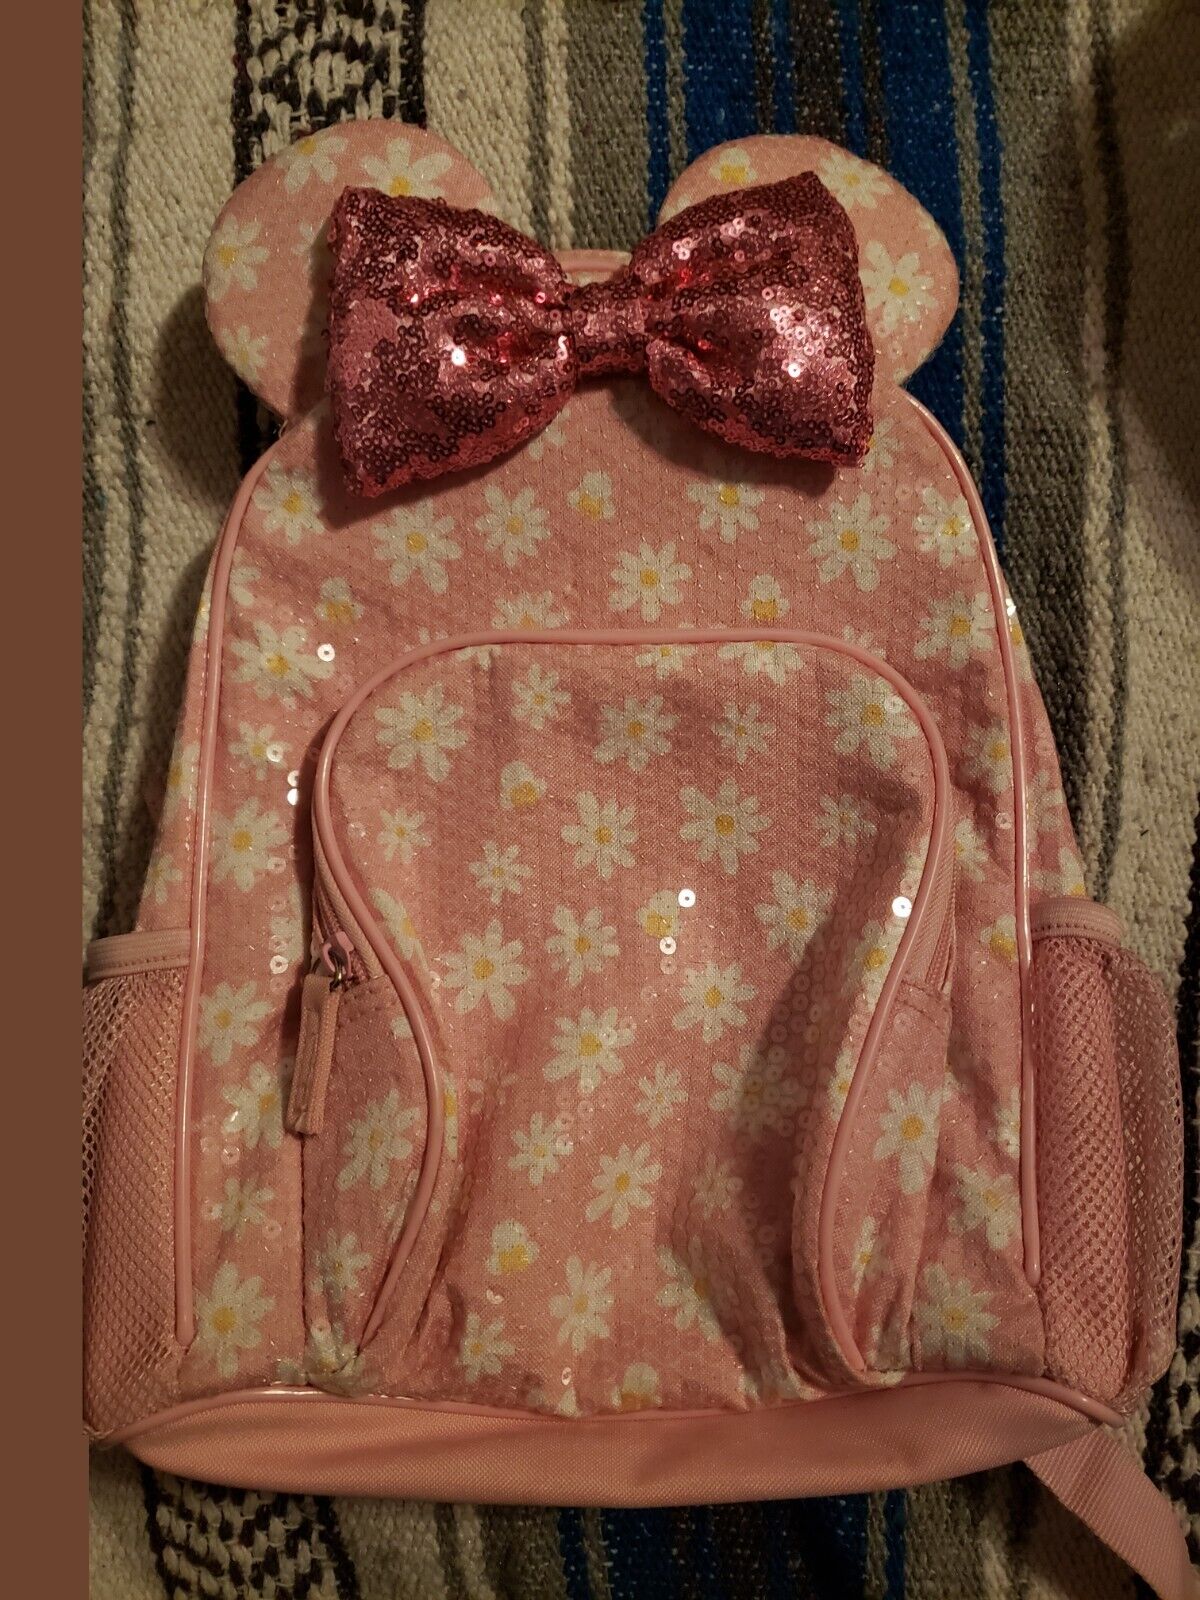 Disney Store Minnie Mouse Pink Daisy Sequin Backpack School bag / Junior